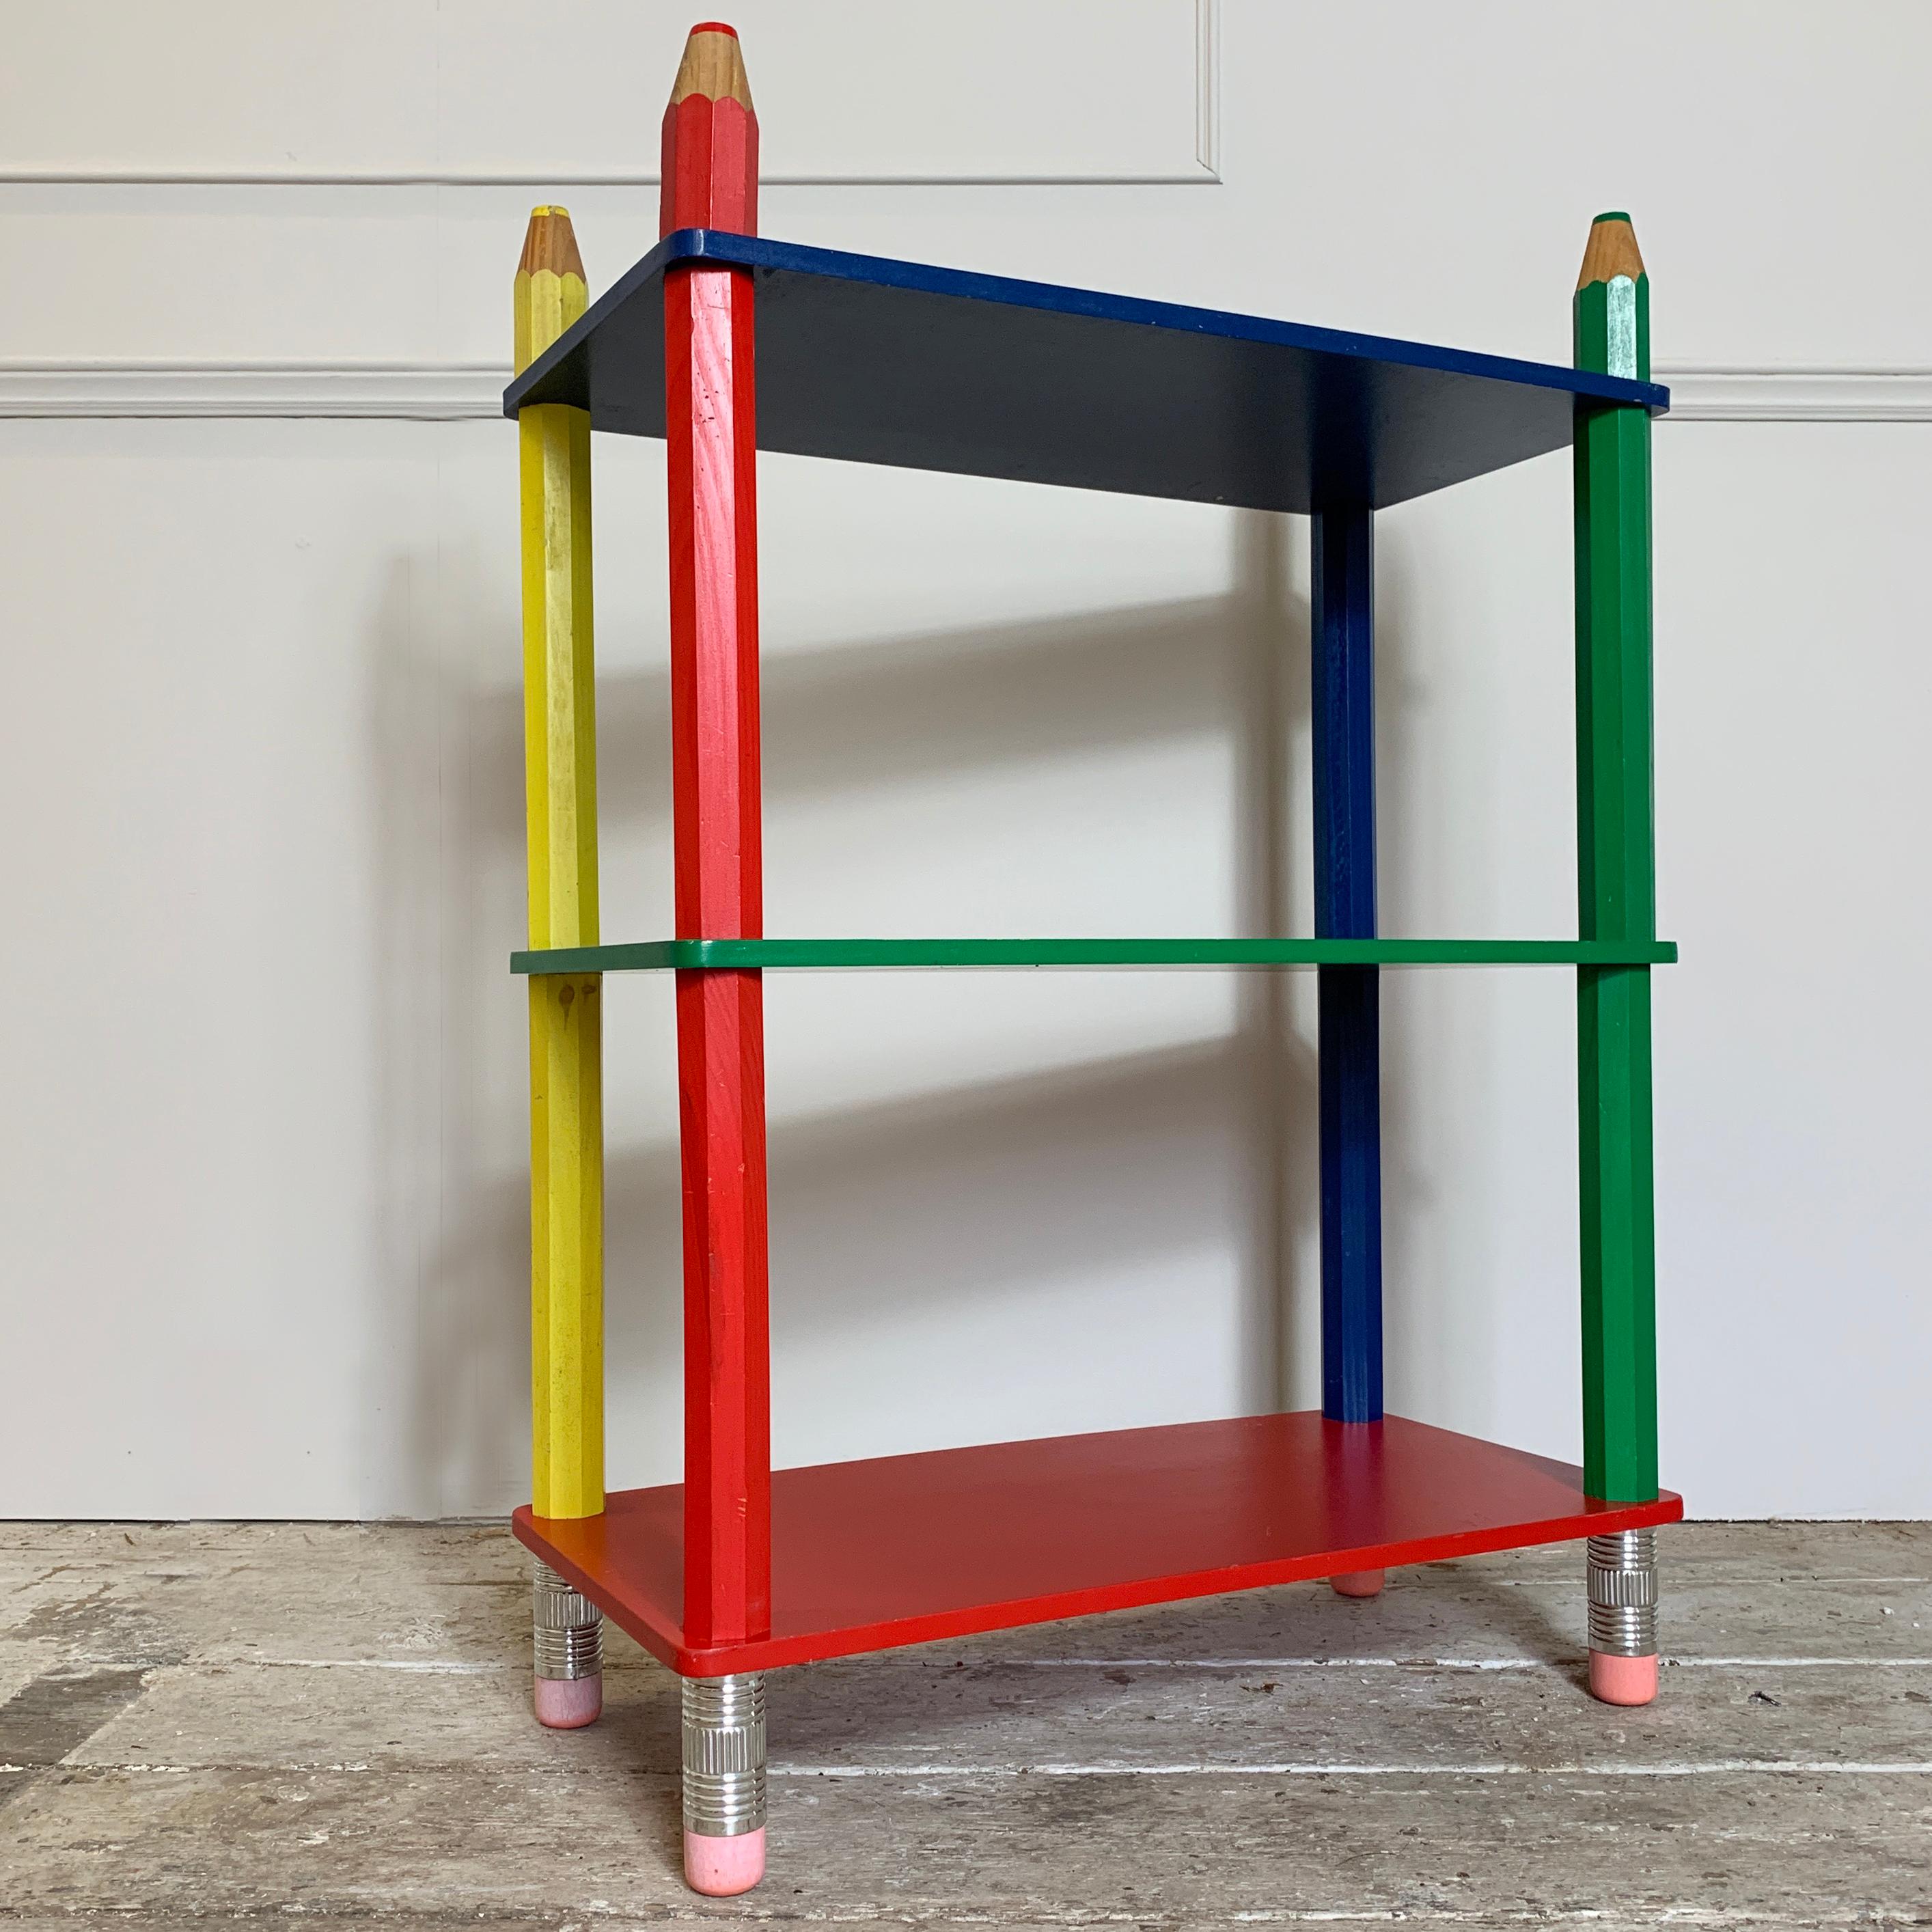 Fantastic Postmodern shelving unit in the design of oversized pencils
Attributed to Pierre Sala, France, 1980s (Model Claire Fontaine)
Great strong primary colors
There are some age related marks to the yellow pencil as shown, also a small mark